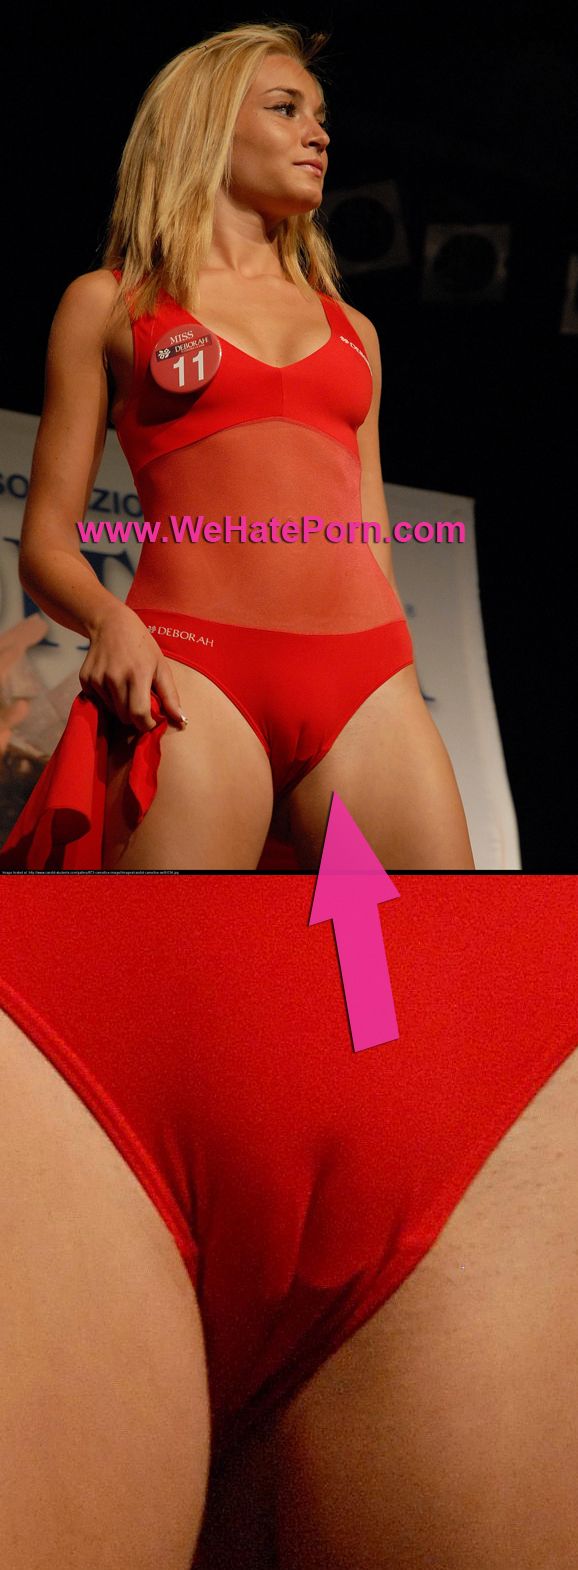 Amazing Swimsuit Cameltoe Oops in a Beauty Contest